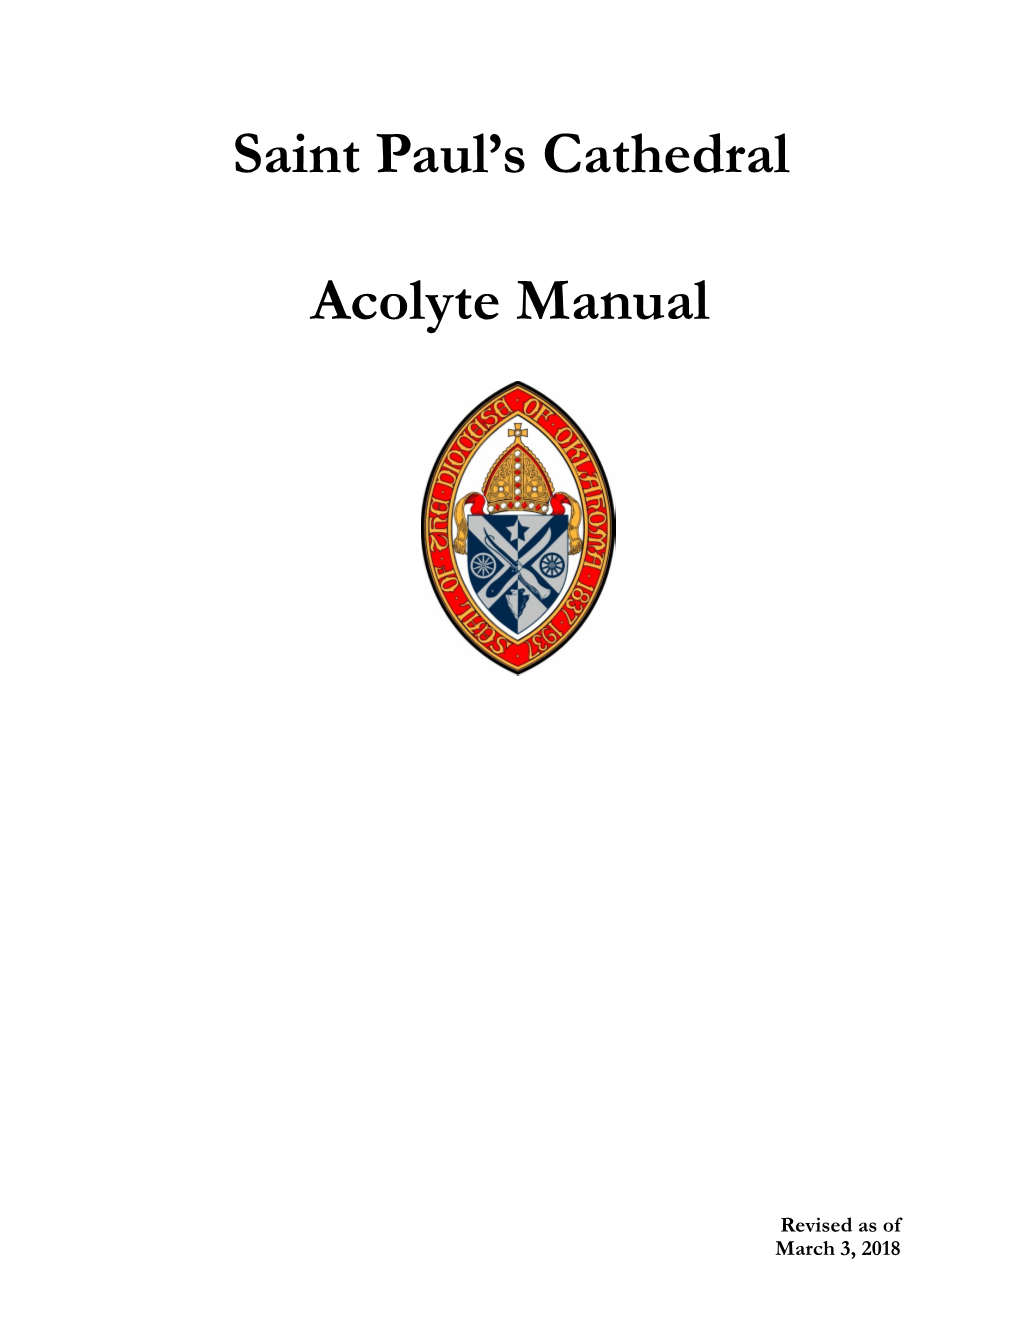 Acolyte Manual